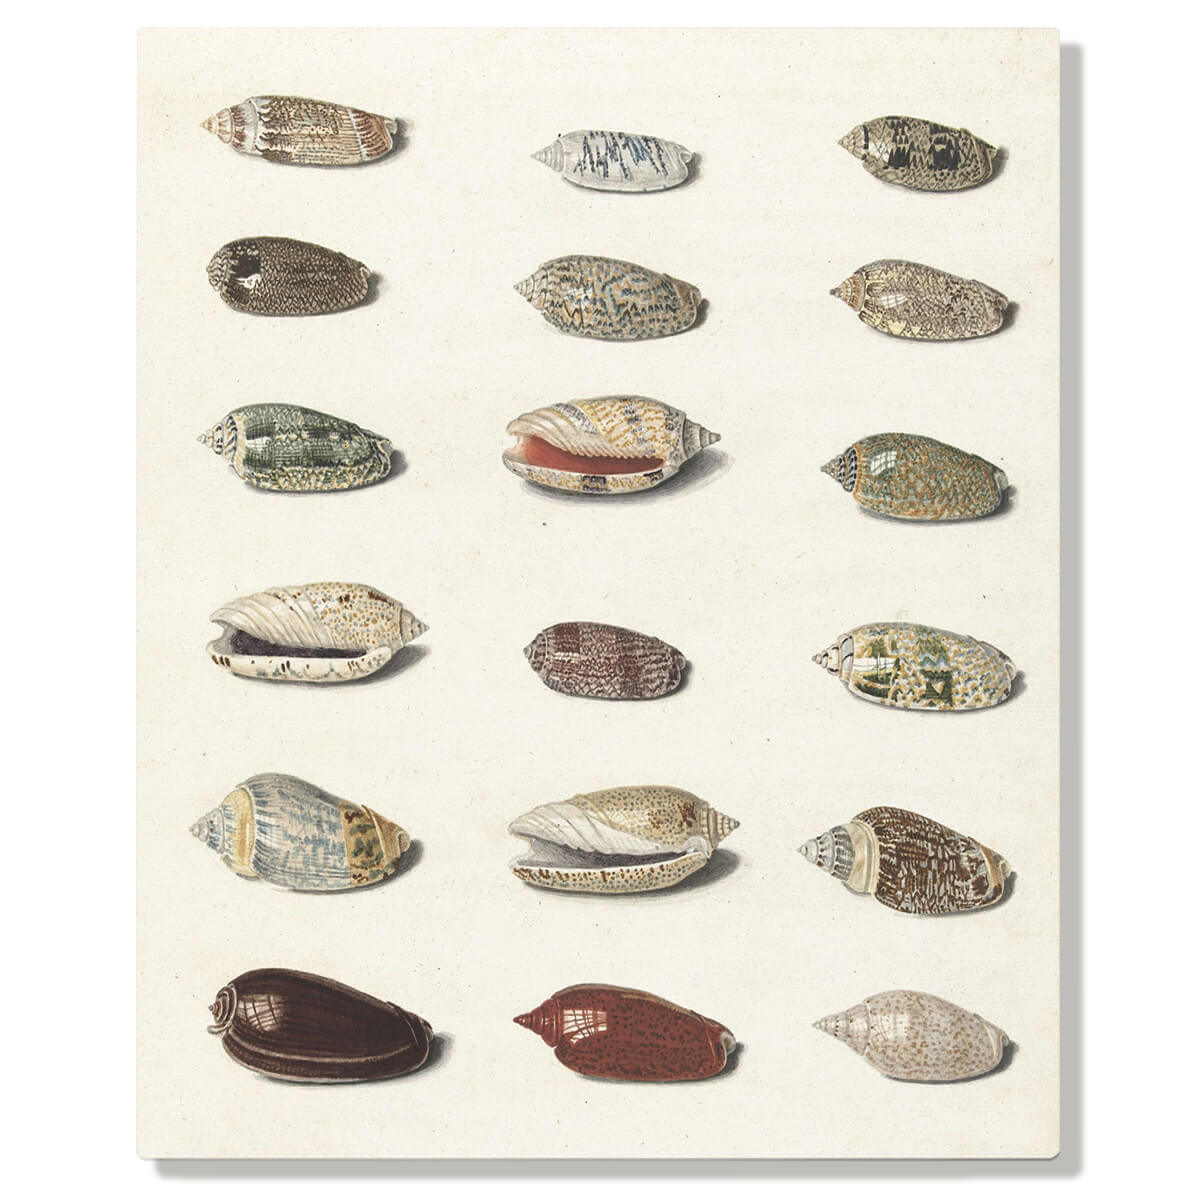 Vintage artwork featuring some small shiny colorful seashells